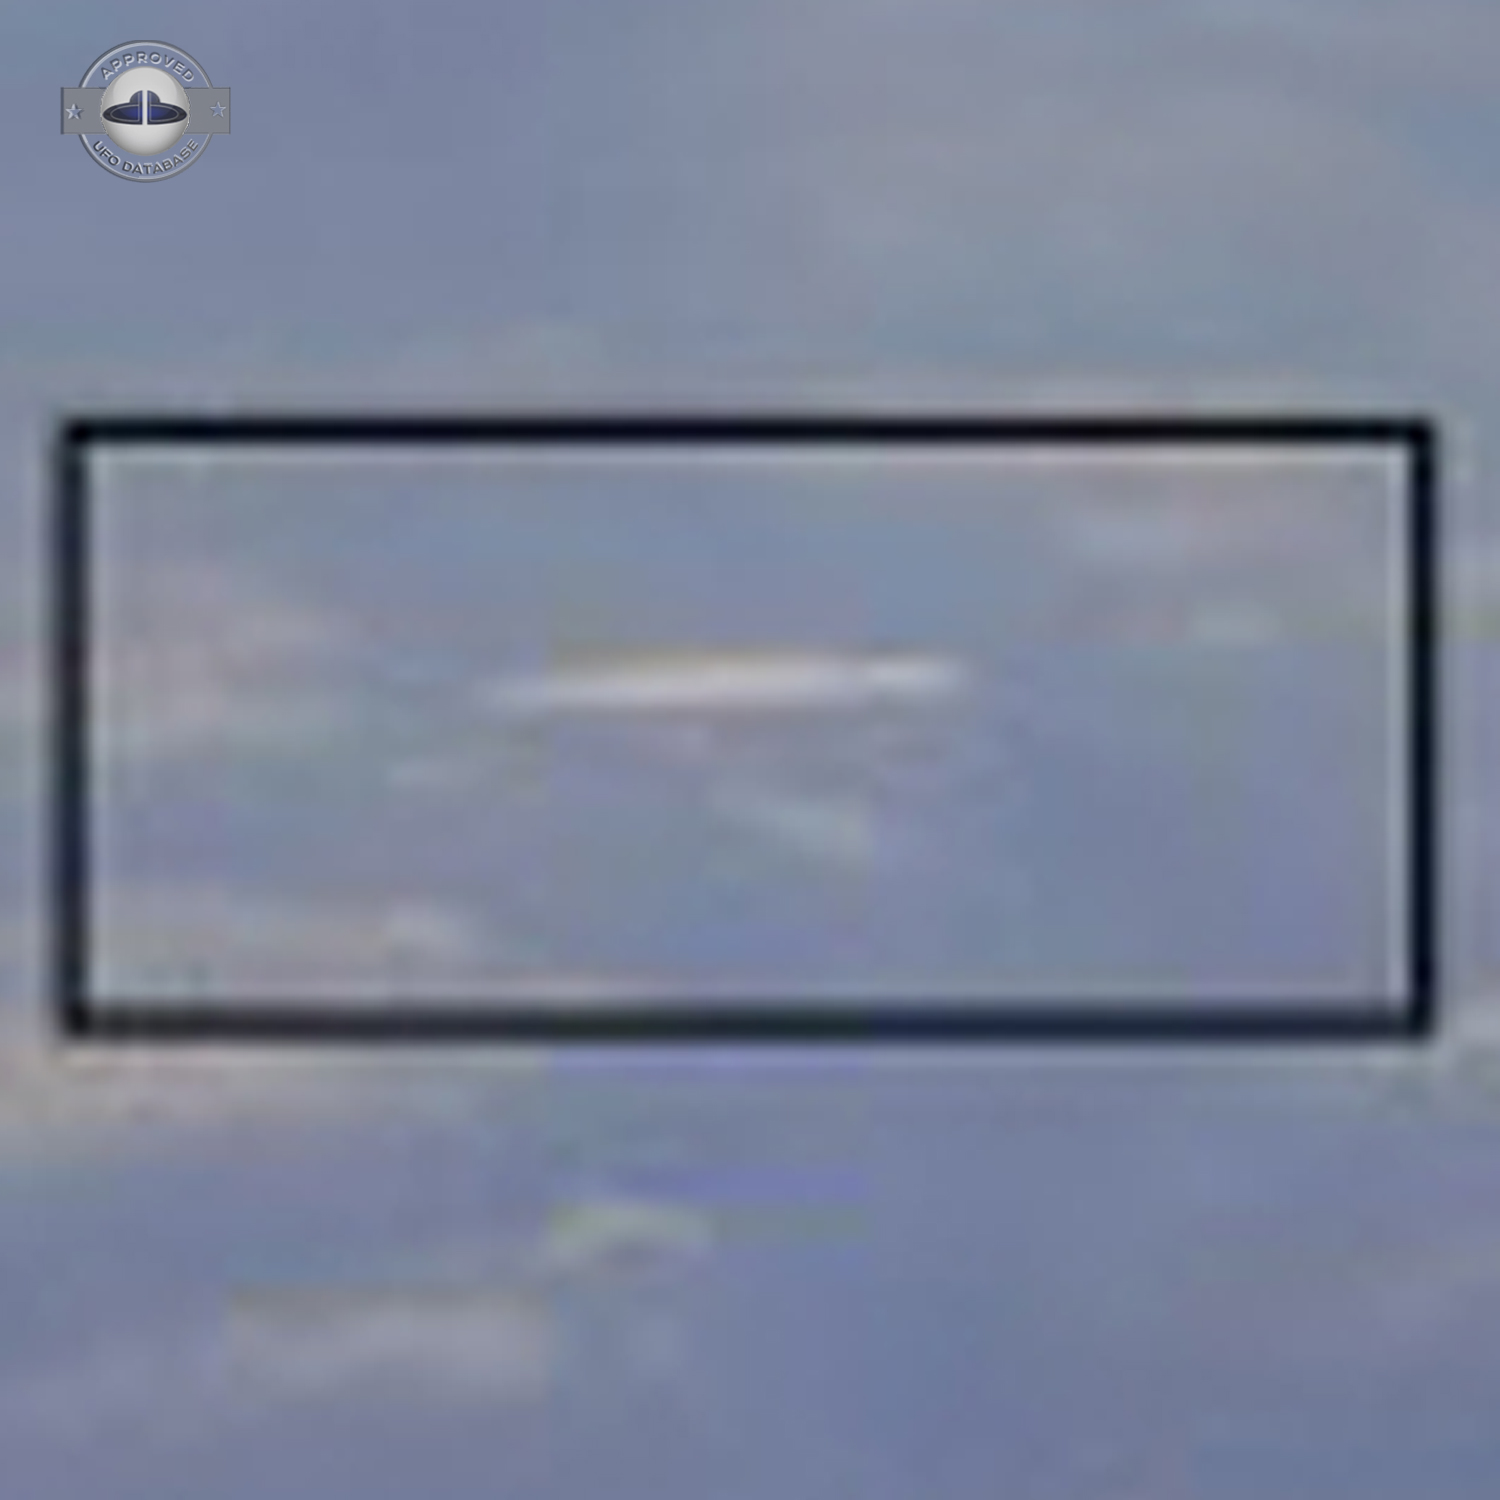 Black Sea UFO picture shot from Airplane | Turkey | January 10 2010 UFO Picture #207-4